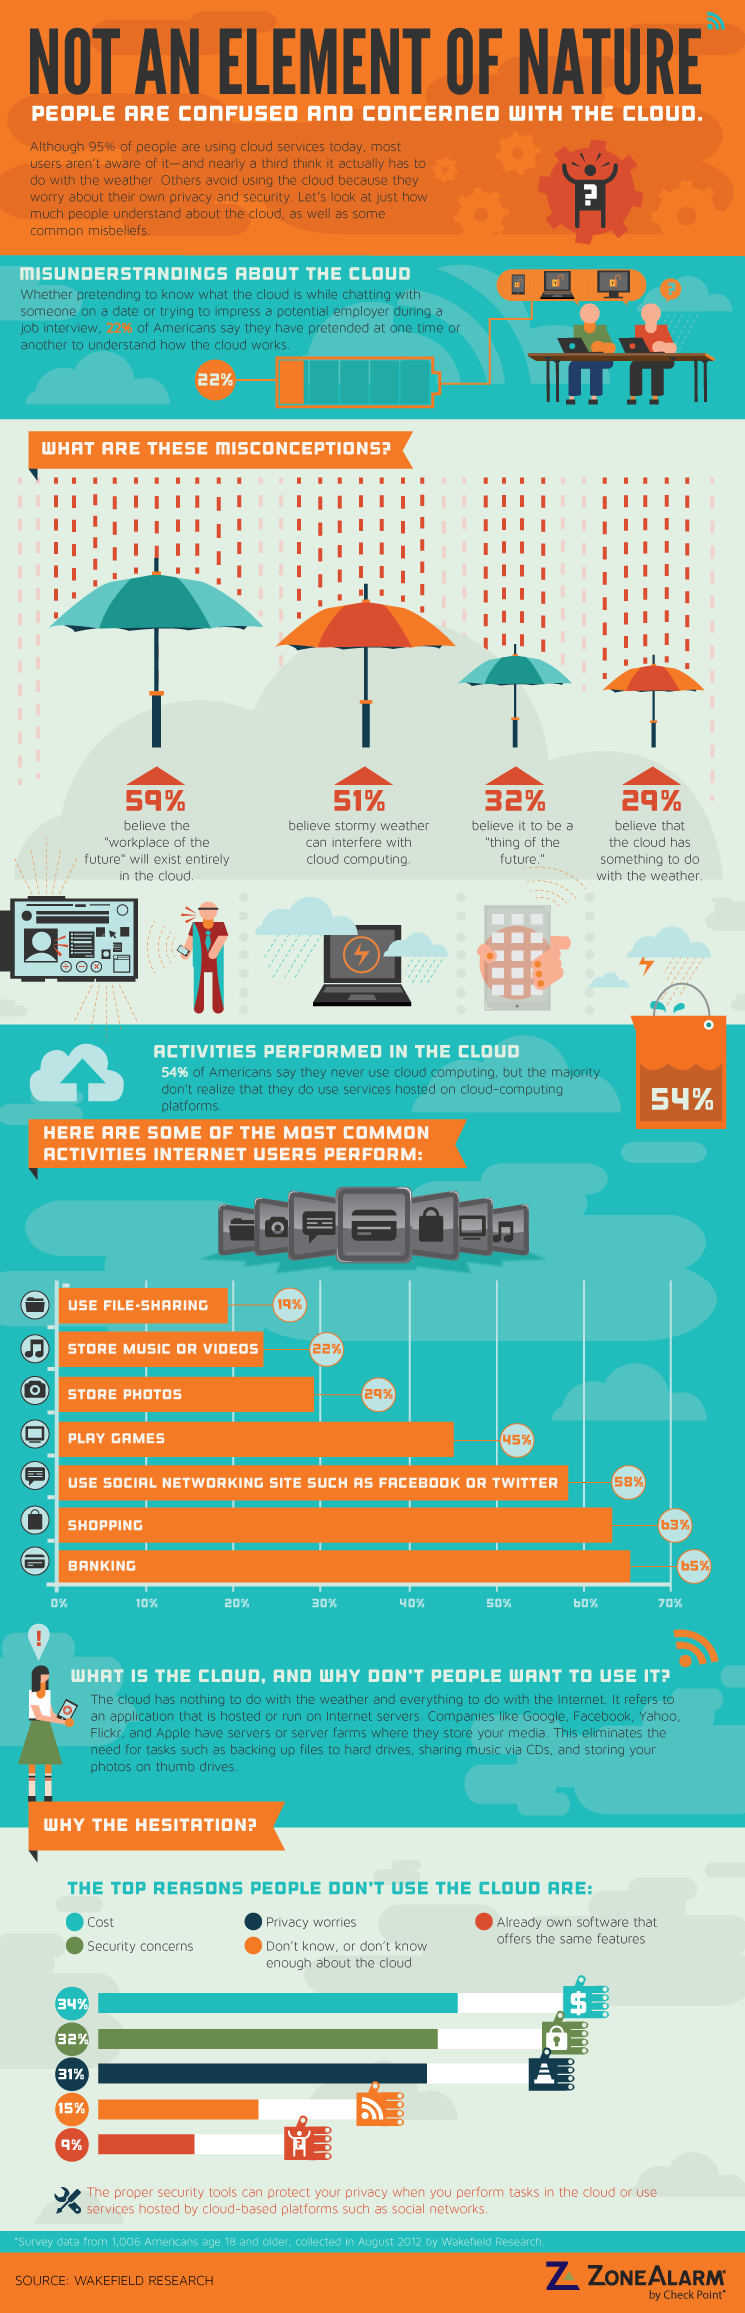 in-the-cloud-misconceptions